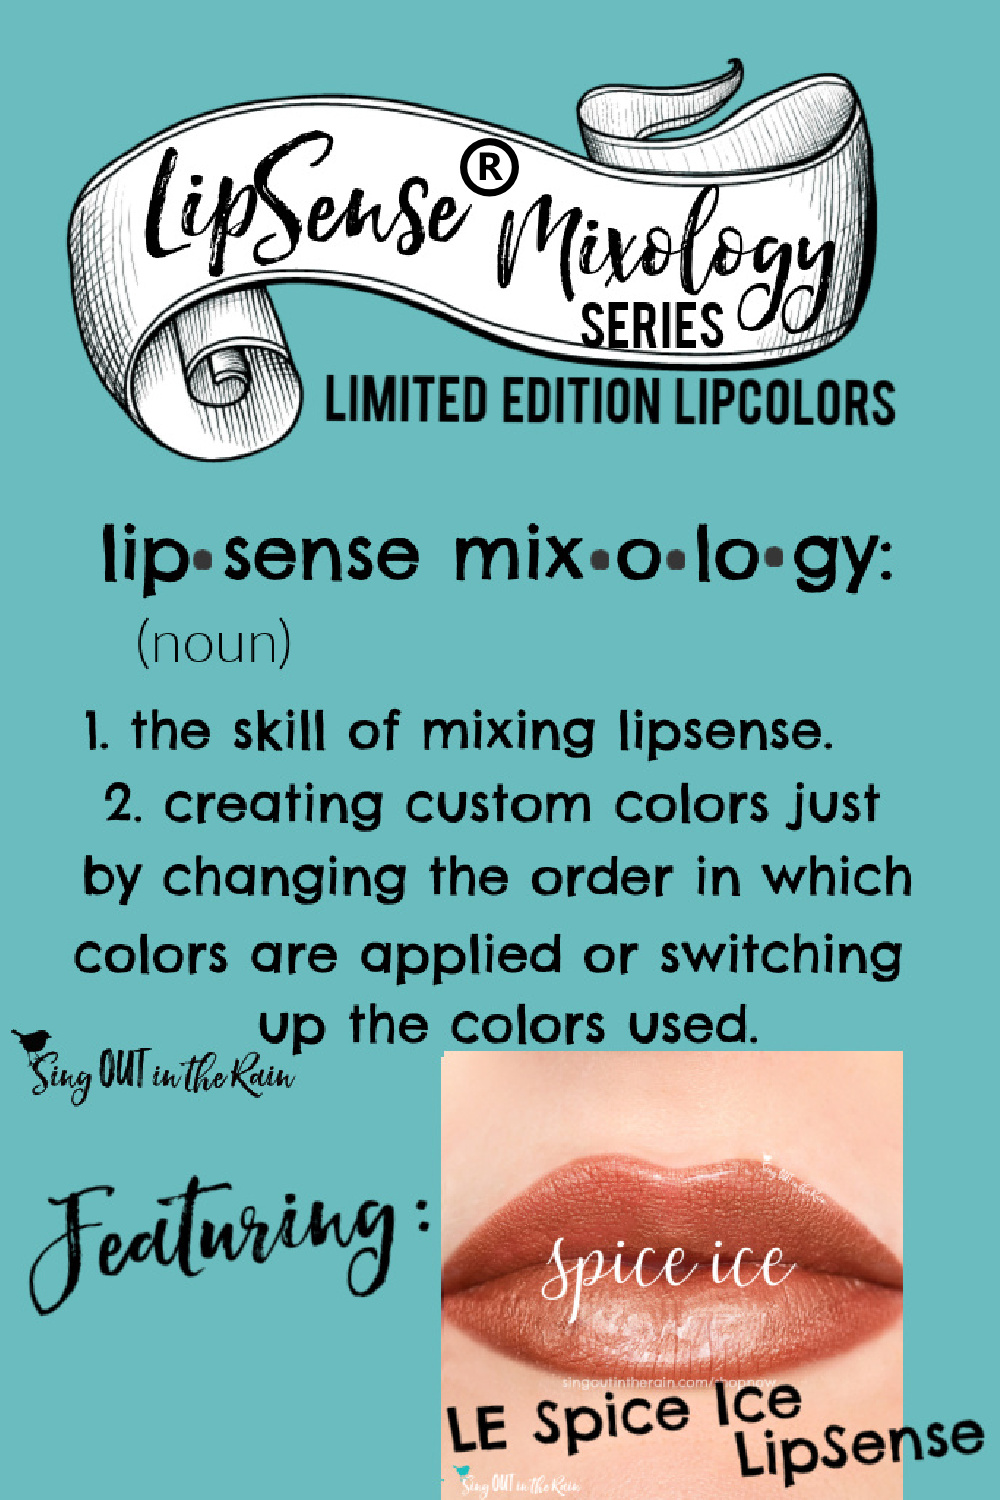 The Ultimate Guide to Spice Ice LipSense Mixology